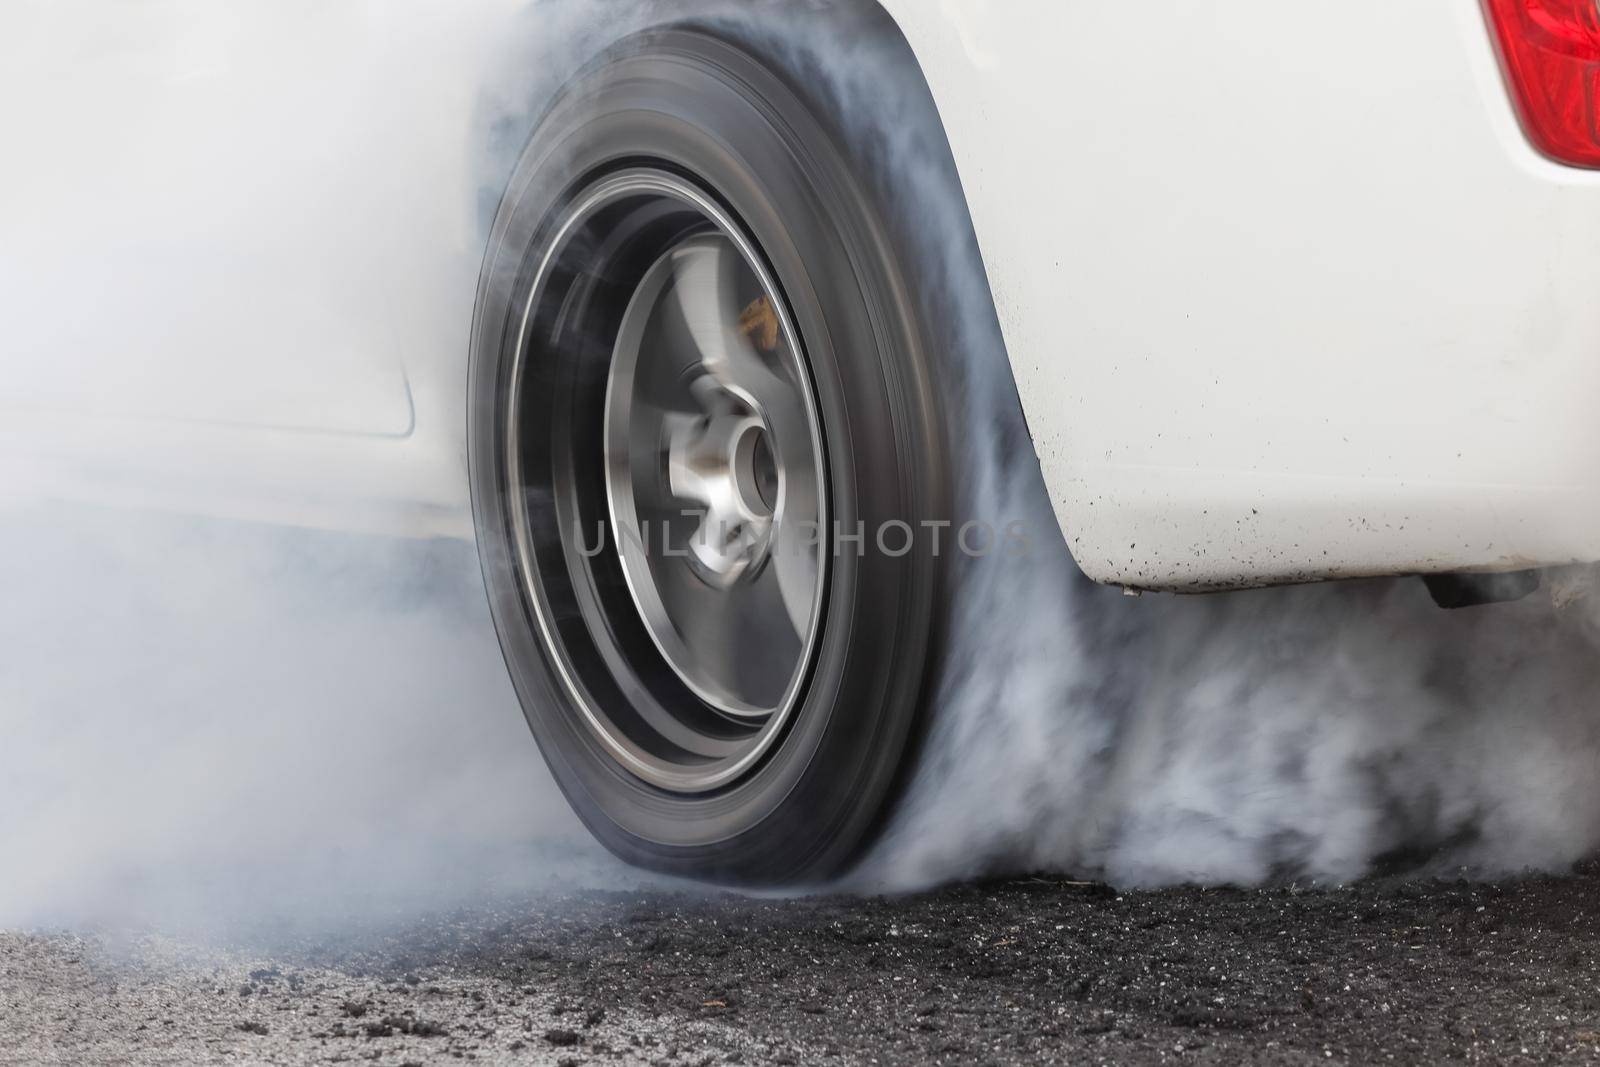 Drag racing car burns rubber off its tires in preparation for the race by toa55